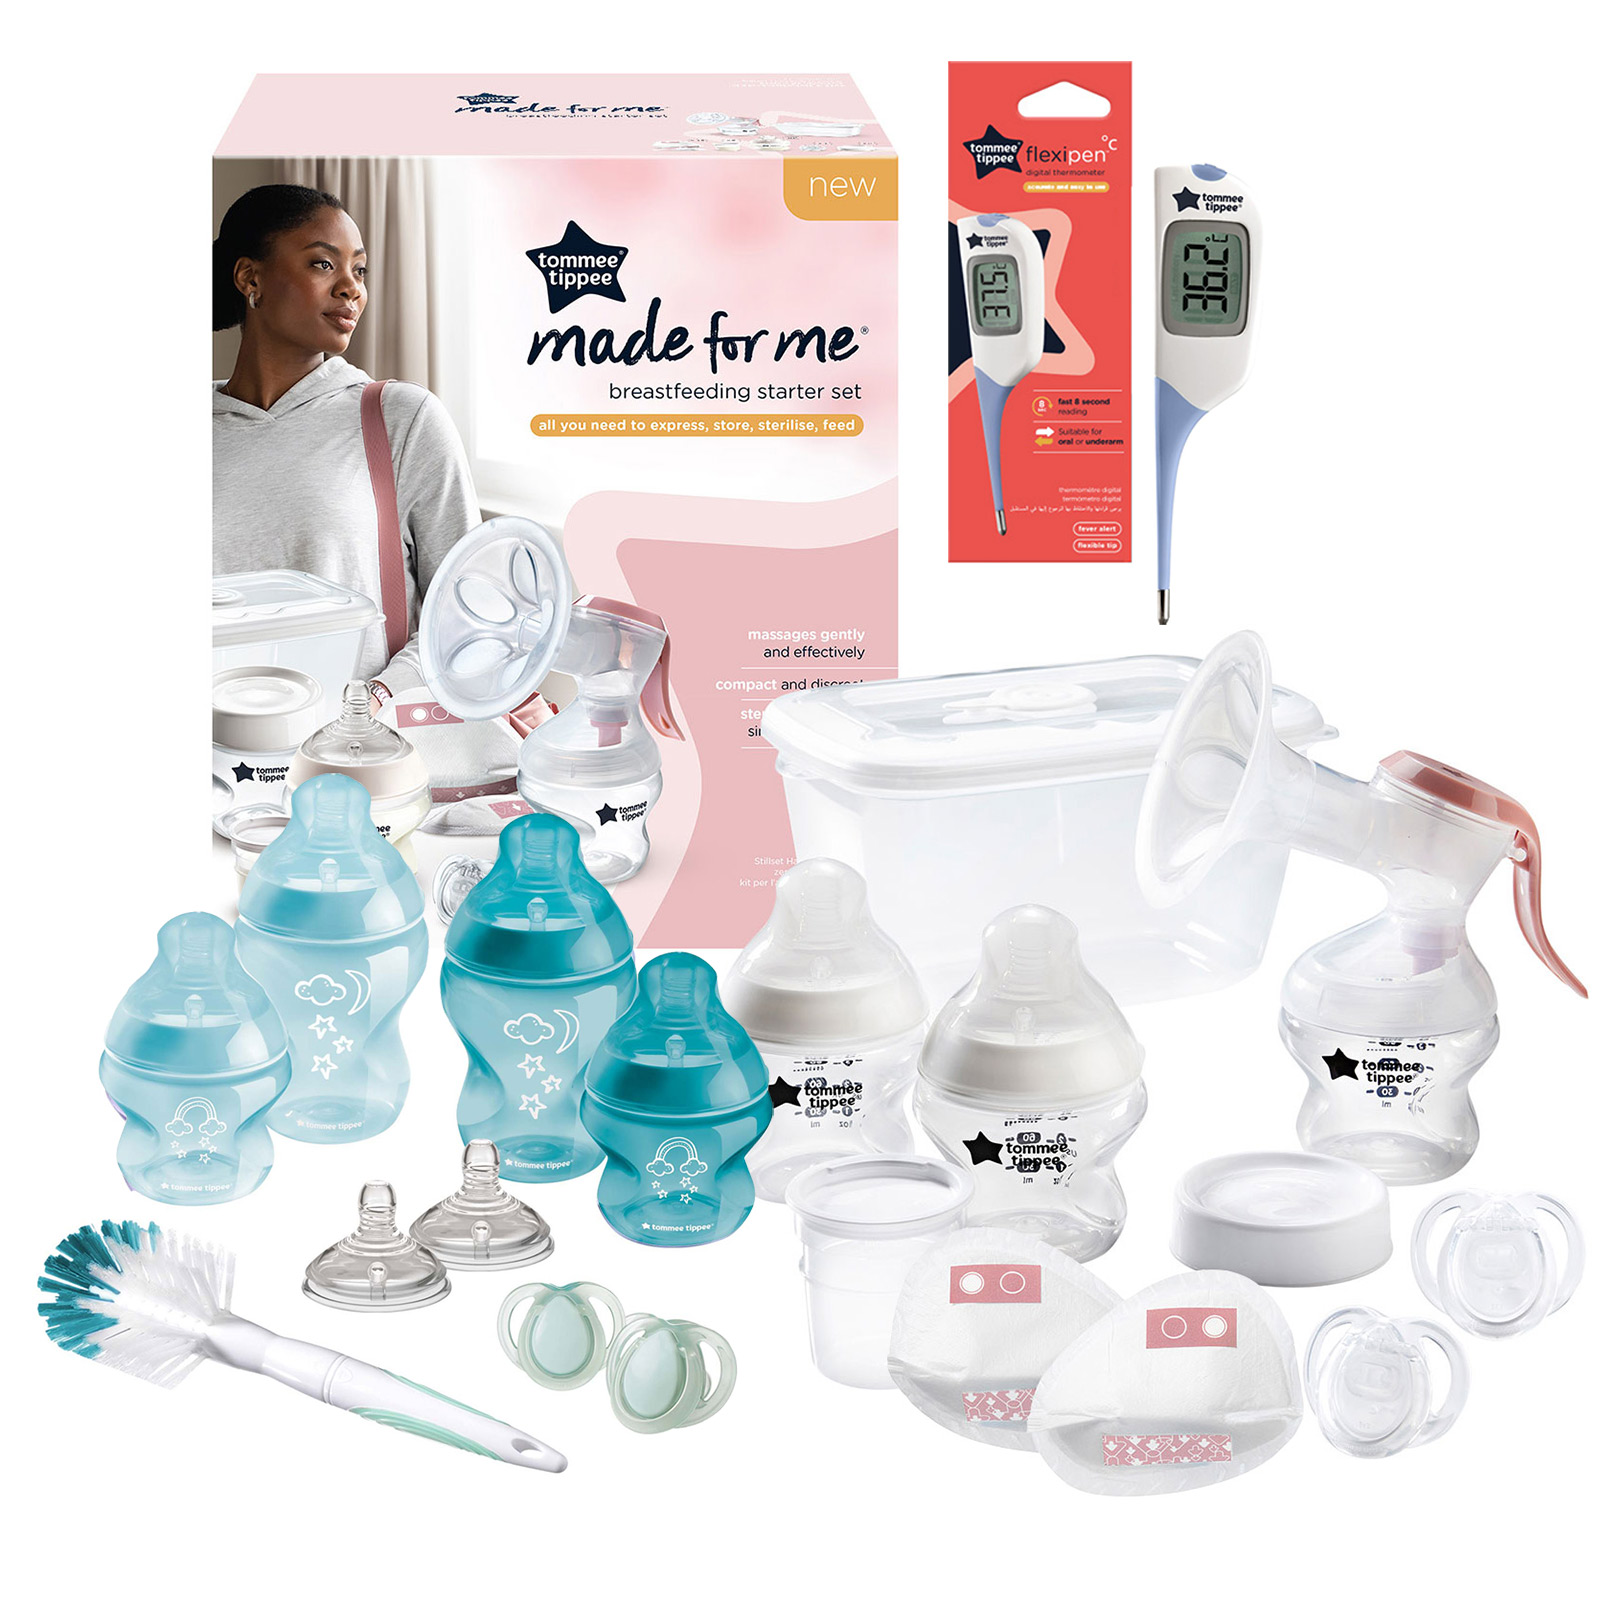 Tomme Tippee Breastfeeding Starter Kit & Closer to Nature Baby Bottle Set With Thermometer - Blue